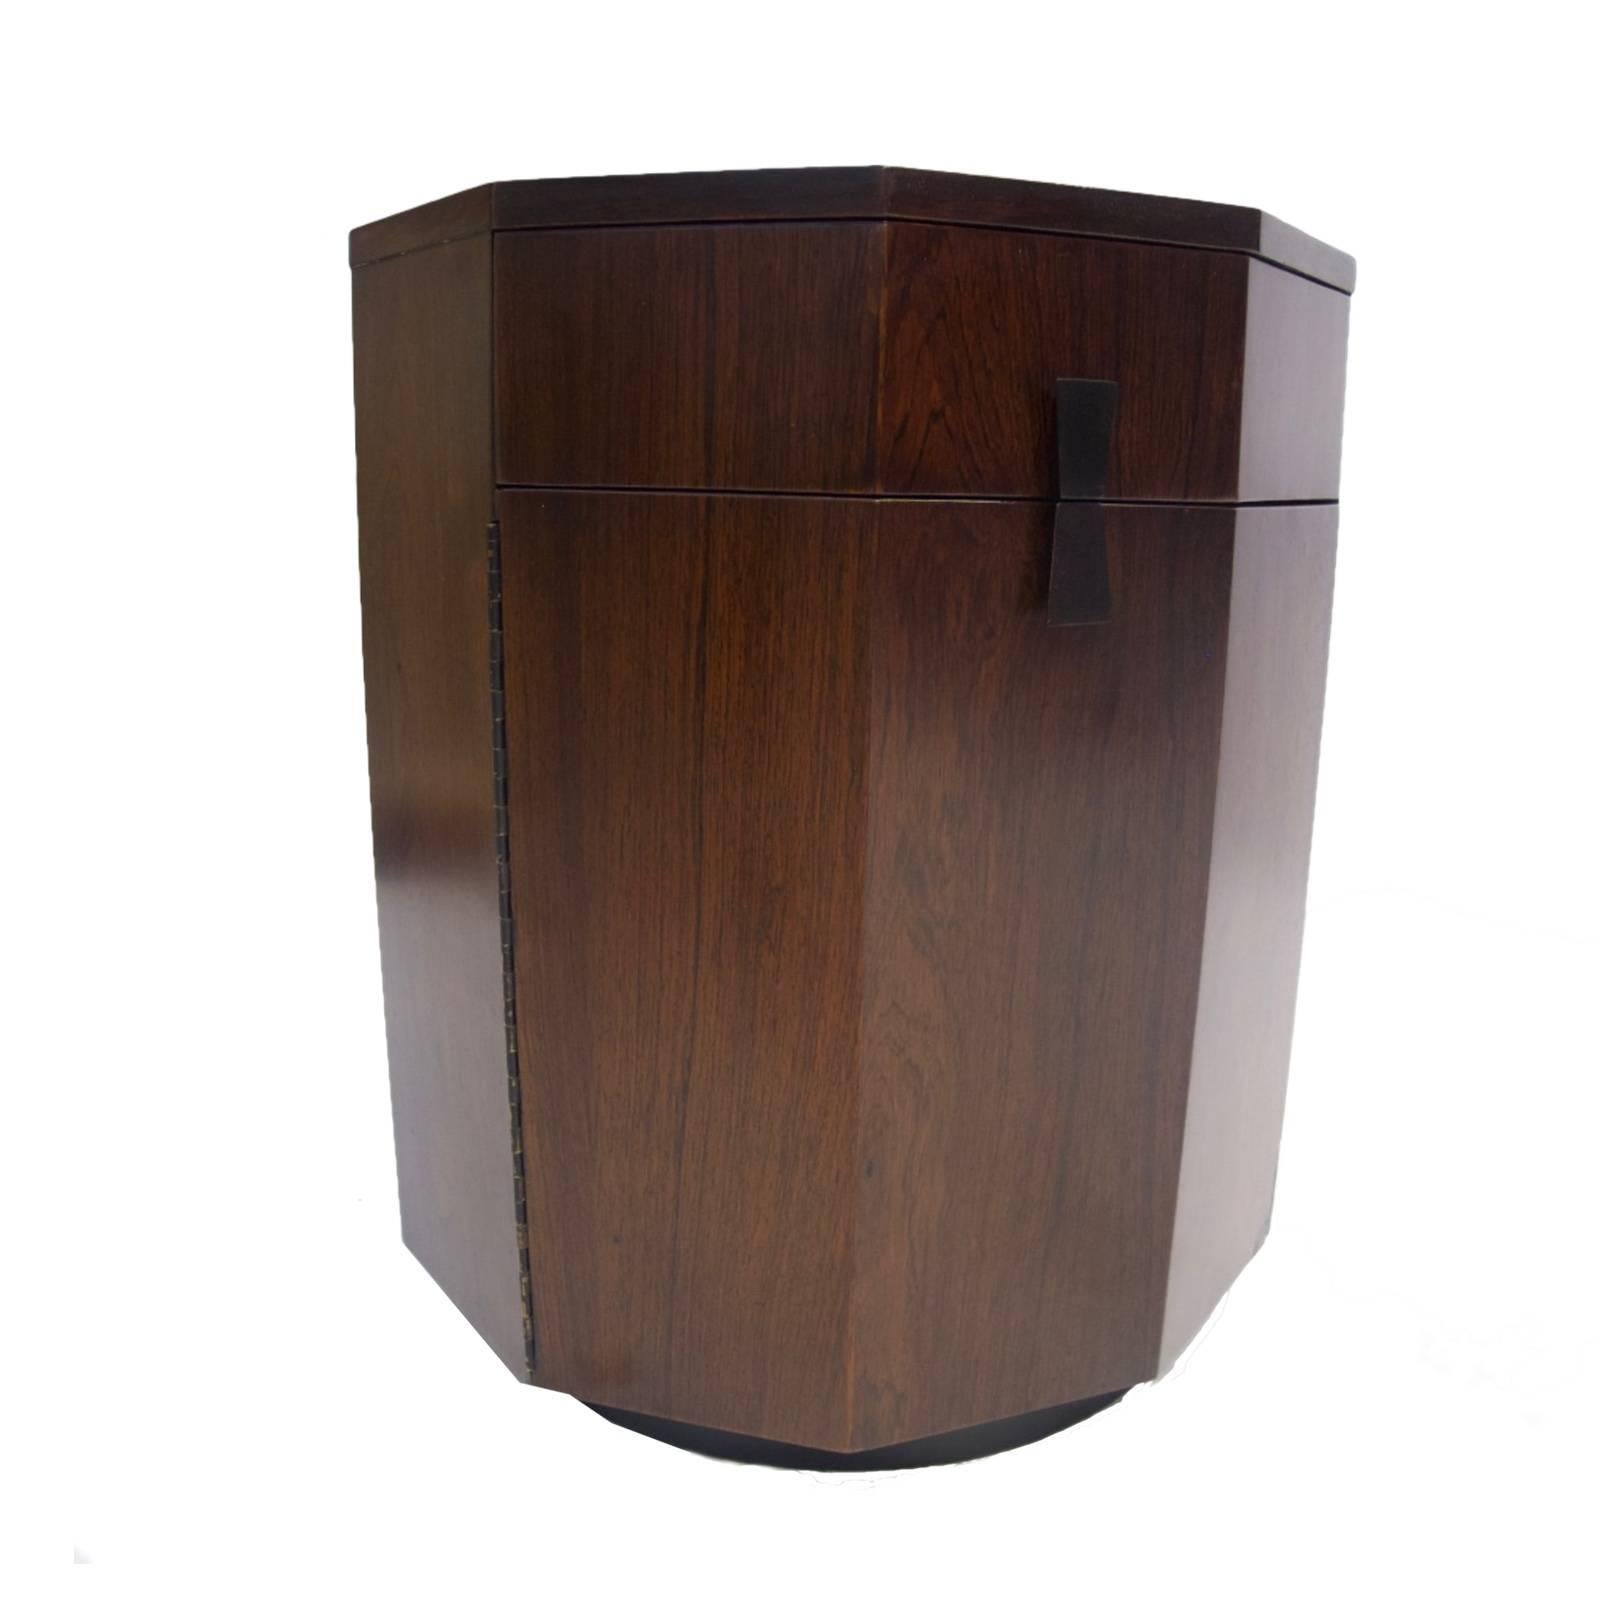 Mid-20th Century Rare Decagon Rosewood Dry Bar Storage Cabinet or Chest by Harvey Probber